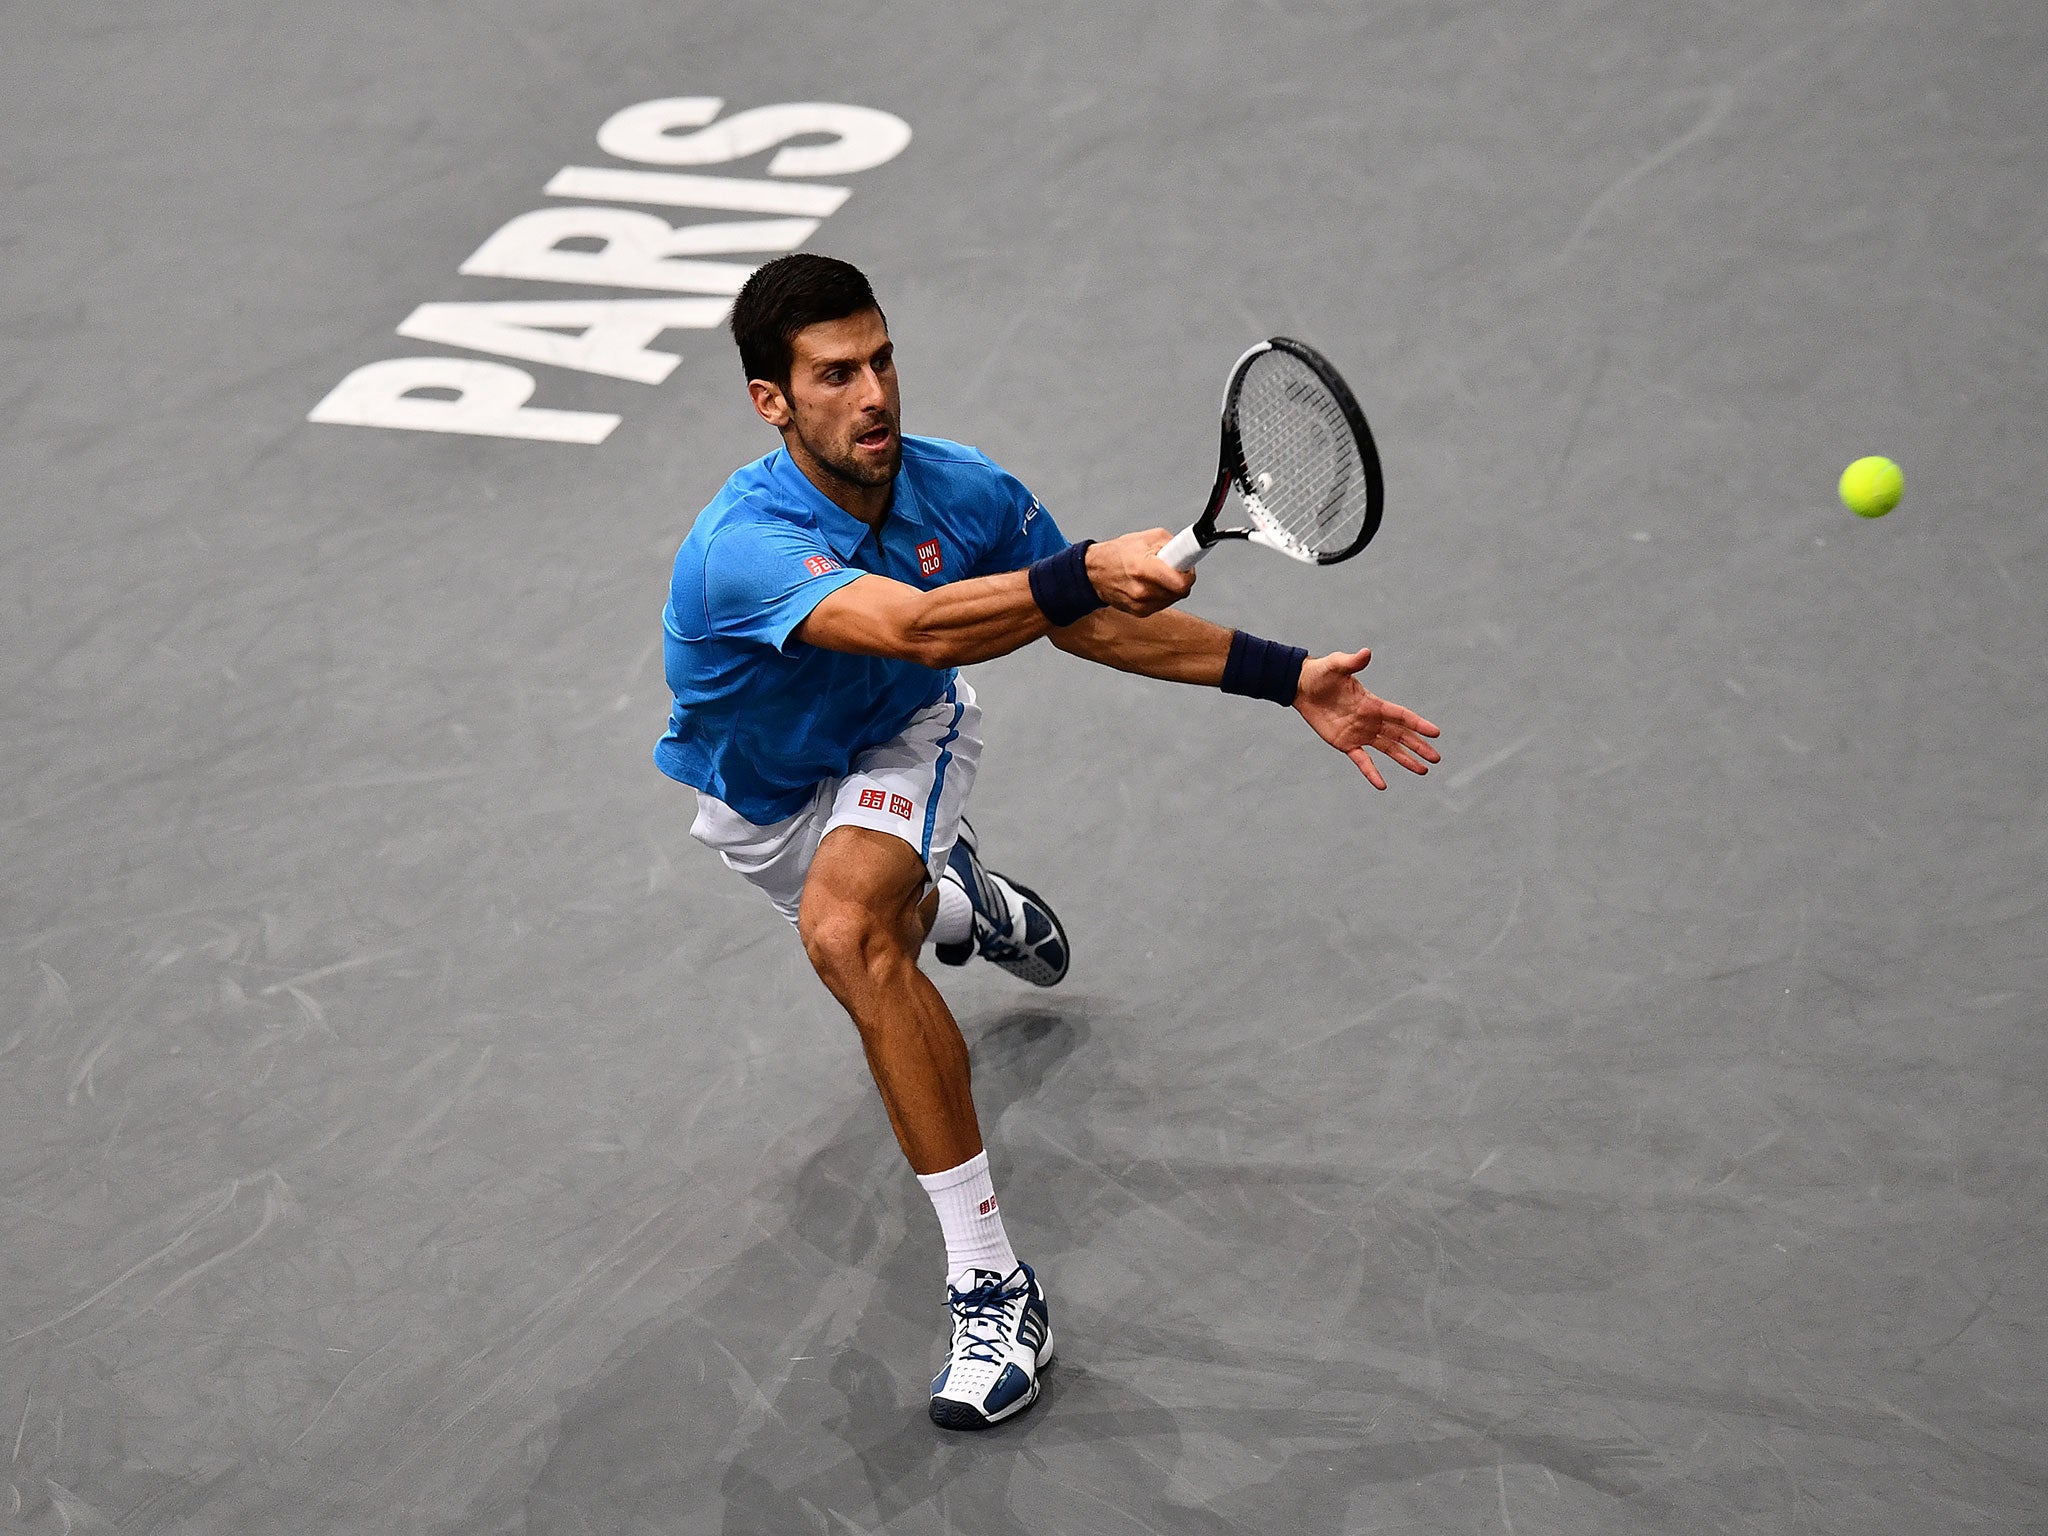 Djokovic fought back in his match to beat Grigor Dimitrov